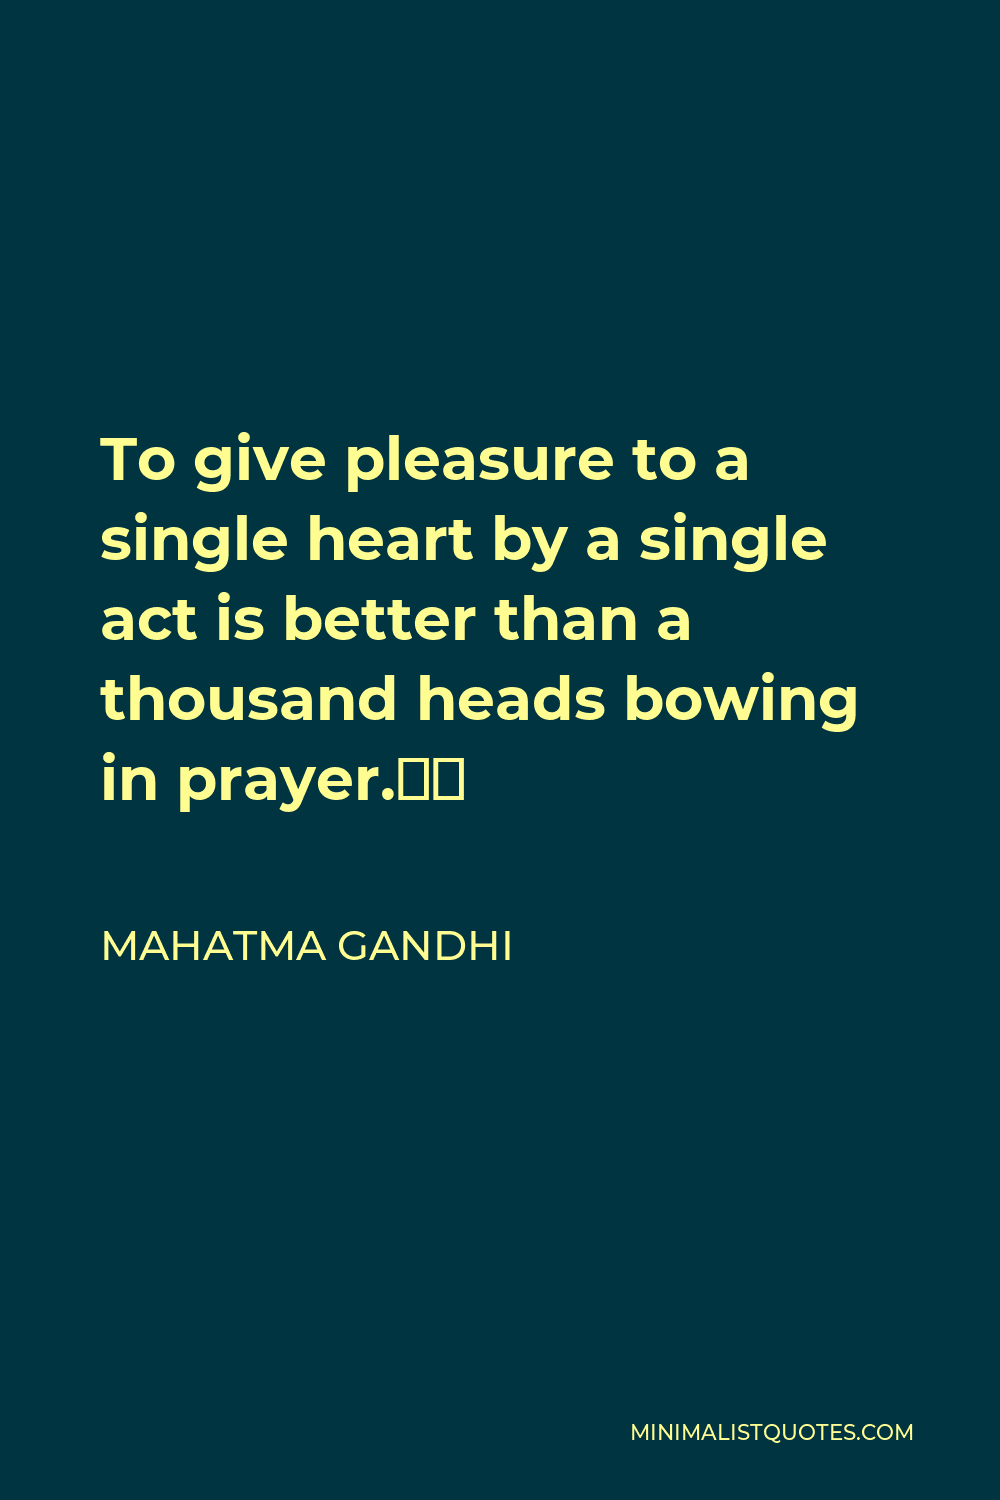 Mahatma Gandhi Quote - To give pleasure to a single heart by a single act is better than a thousand heads bowing in prayer.”